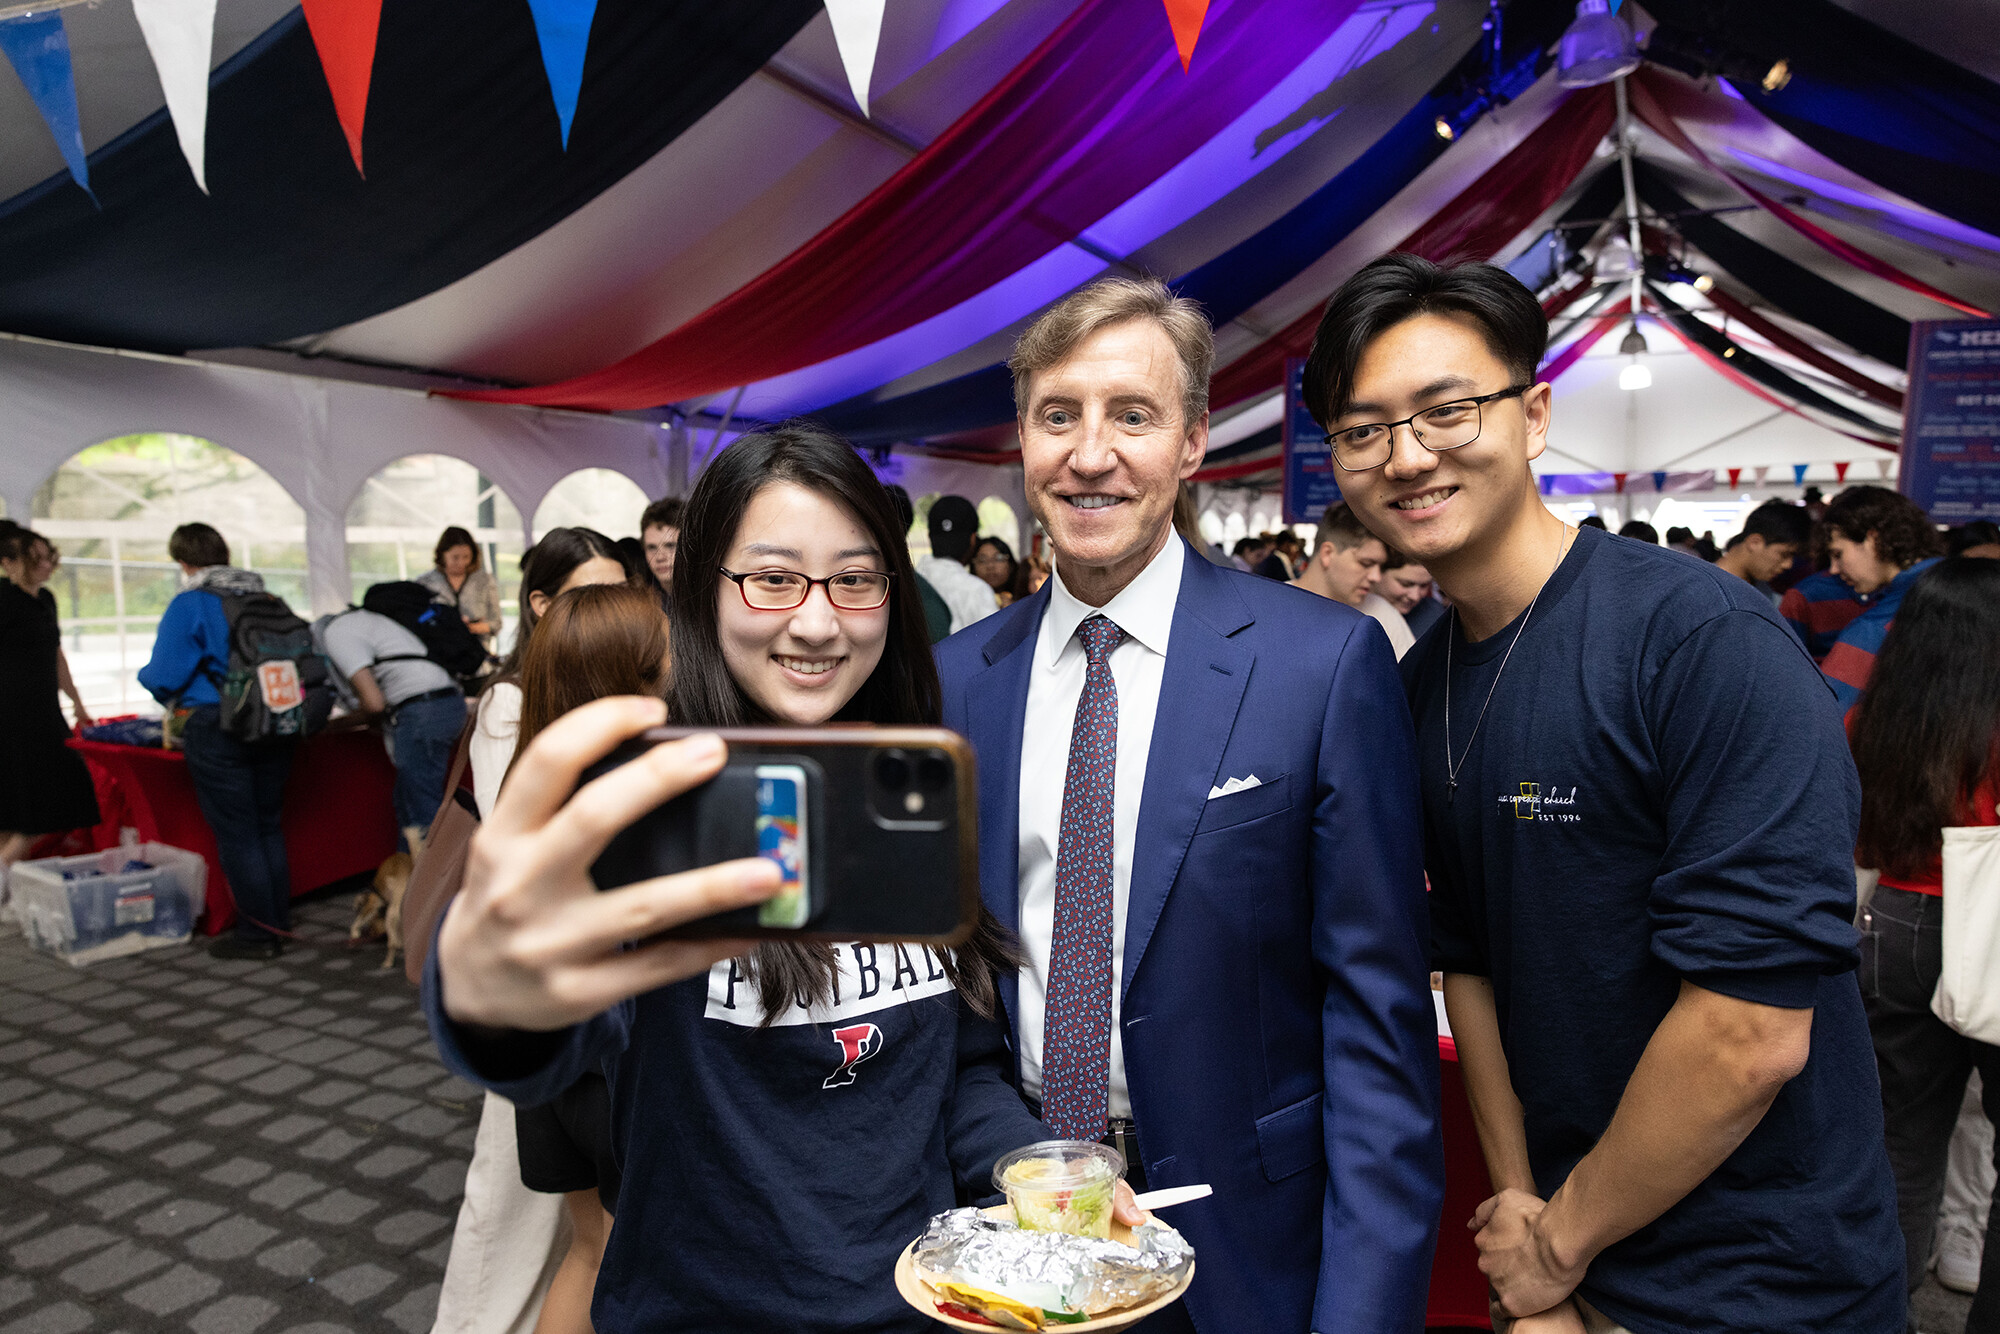 Jameson takes selfie with students at carnival